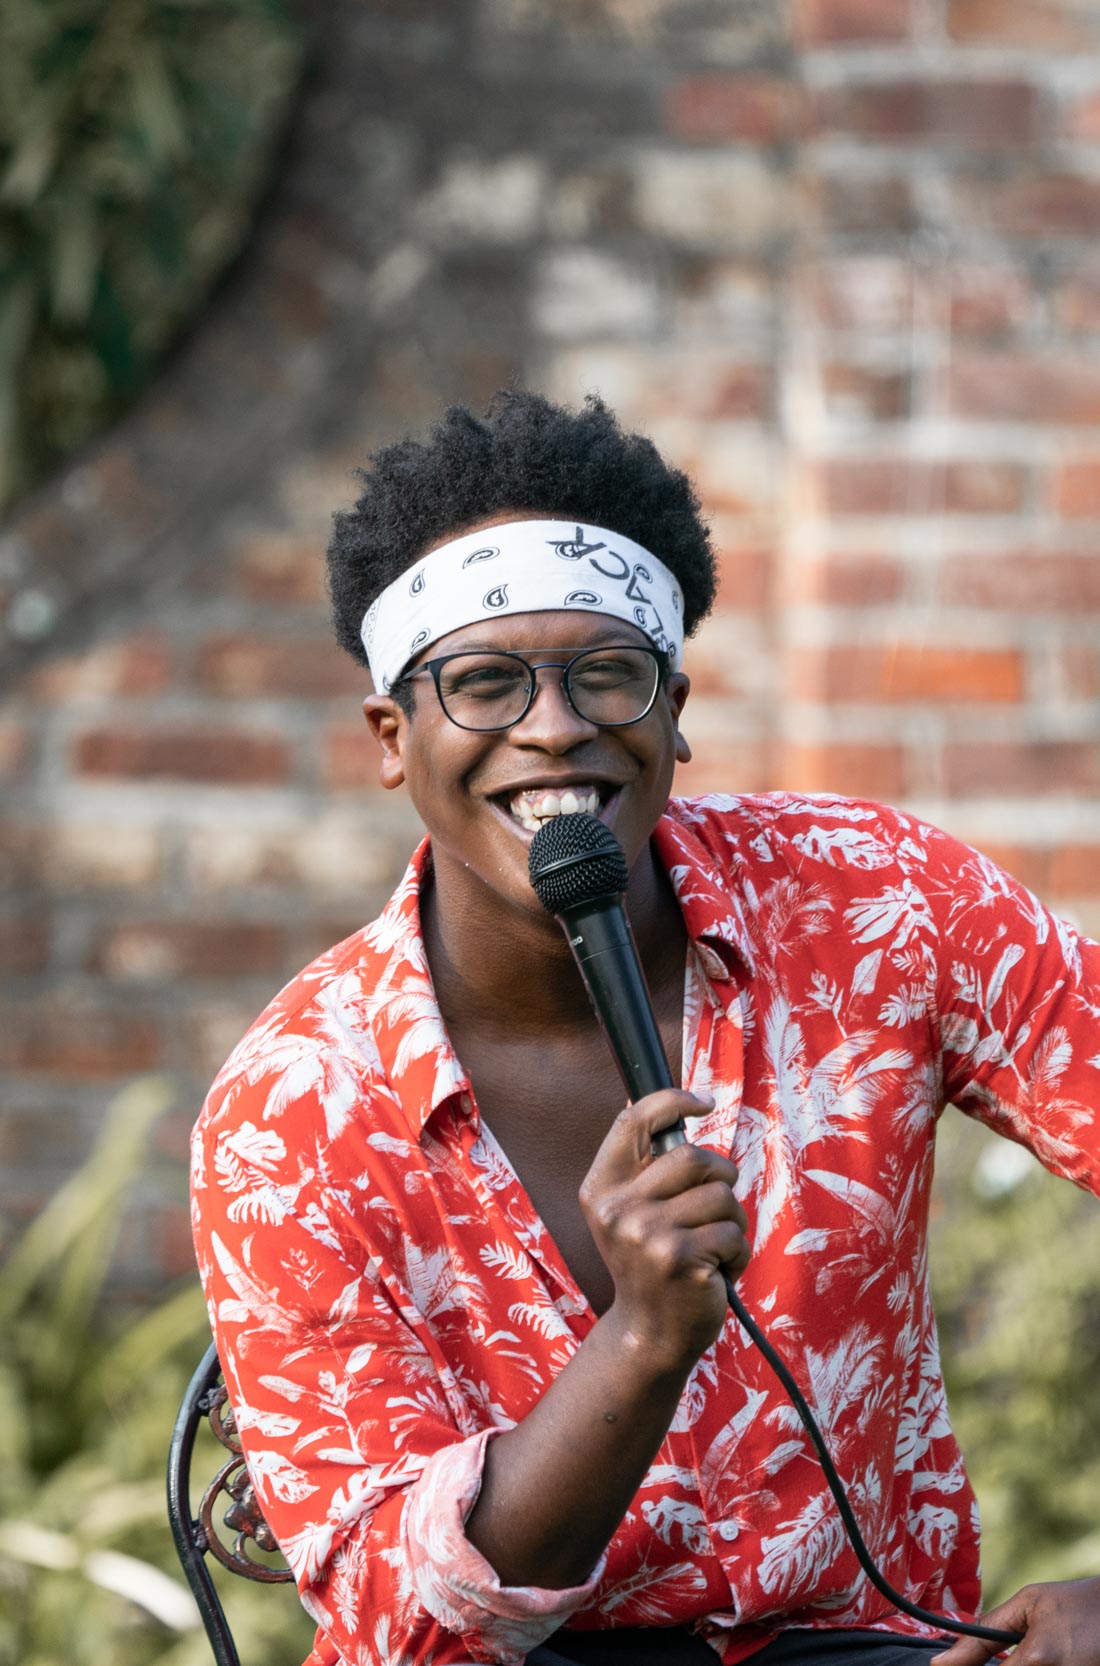 Musician singing and smiling during a performance in New Orleans